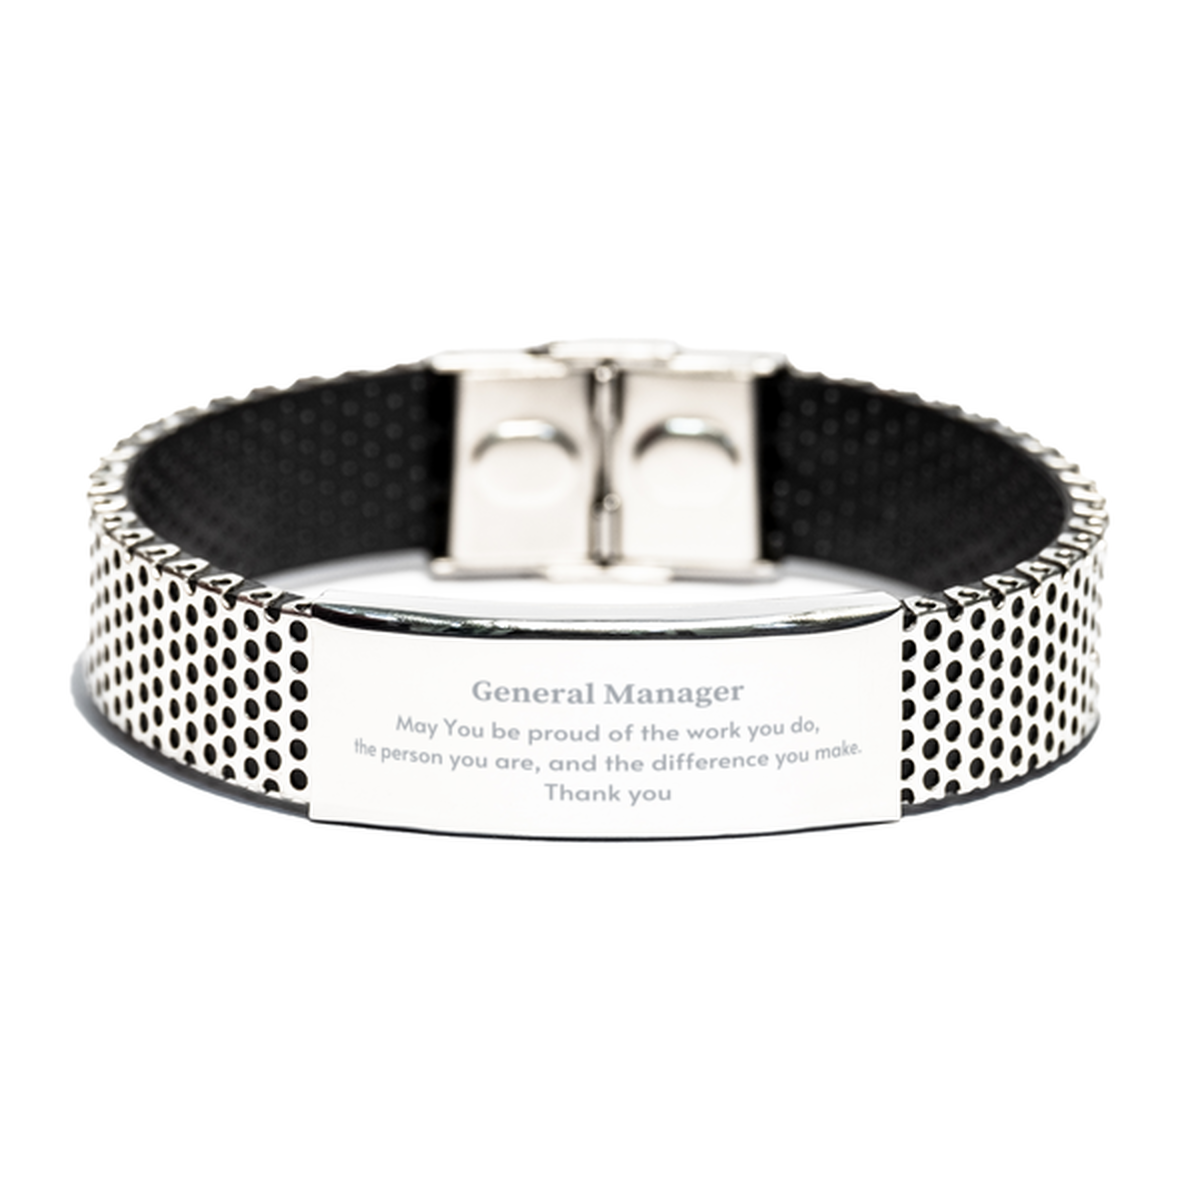 Heartwarming Stainless Steel Bracelet Retirement Coworkers Gifts for General Manager, General Manager May You be proud of the work you do, the person you are Gifts for Boss Men Women Friends